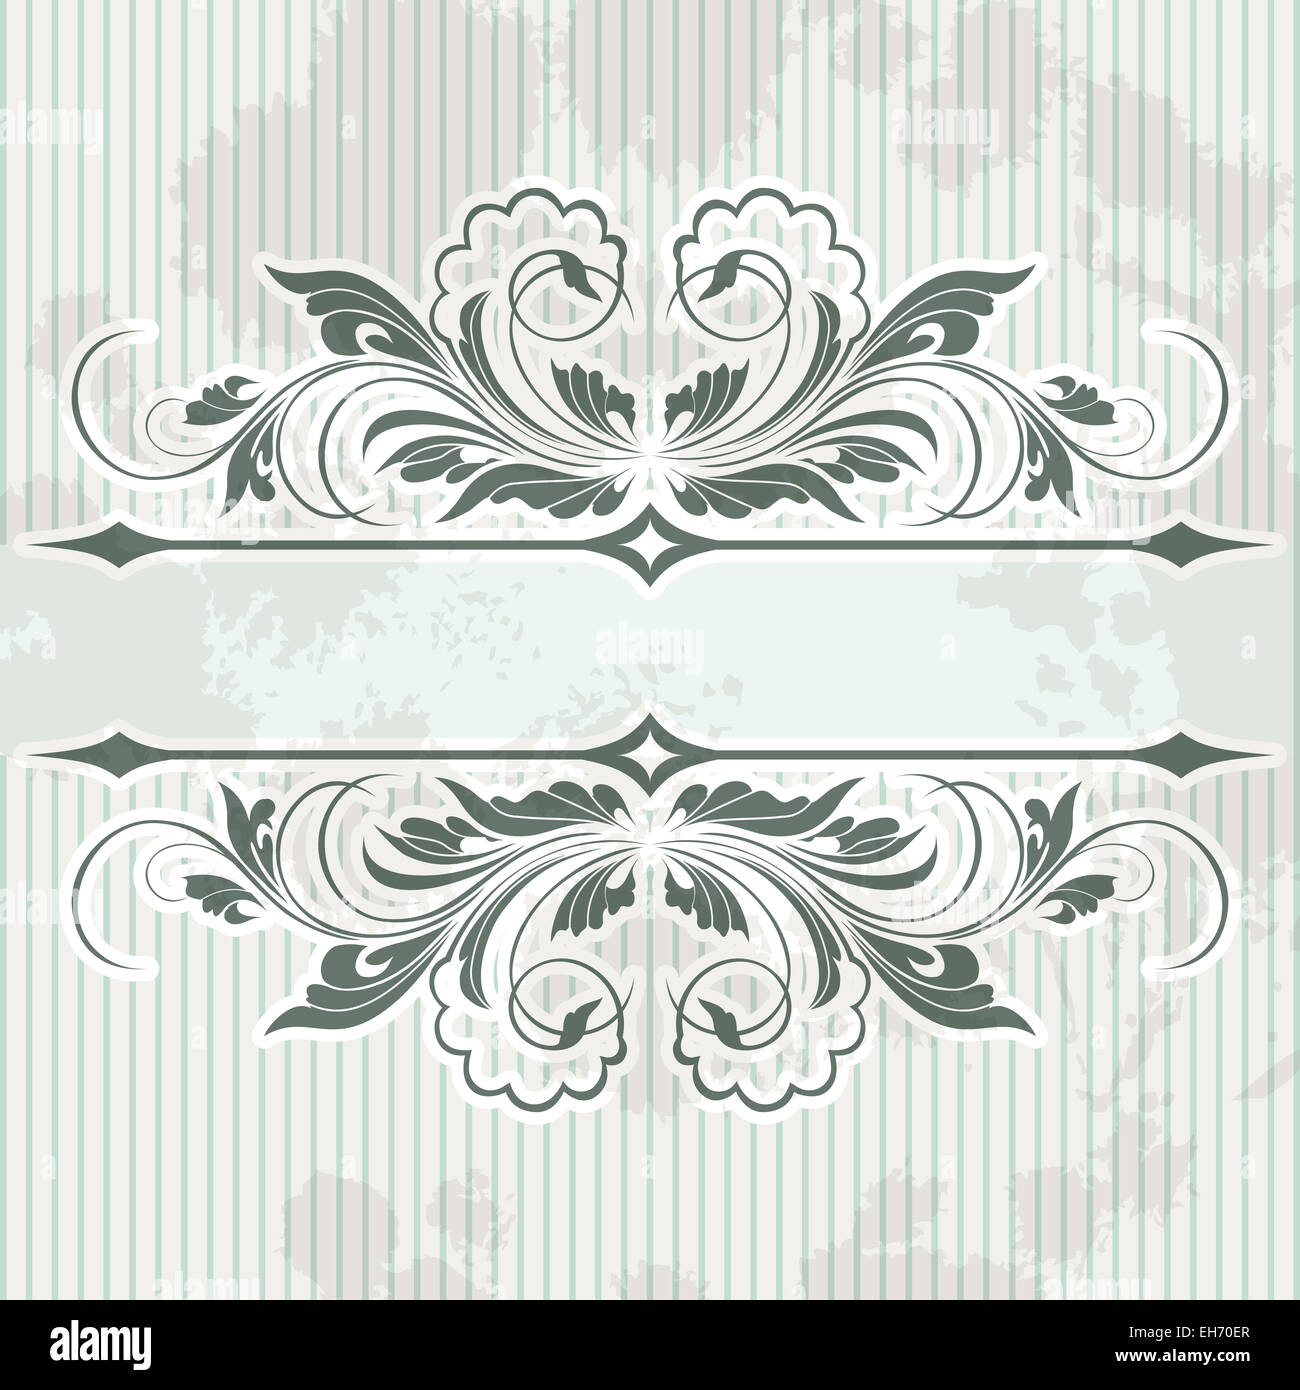 Illustration with card drawn in vintage style with using grunge pattern Stock Photo